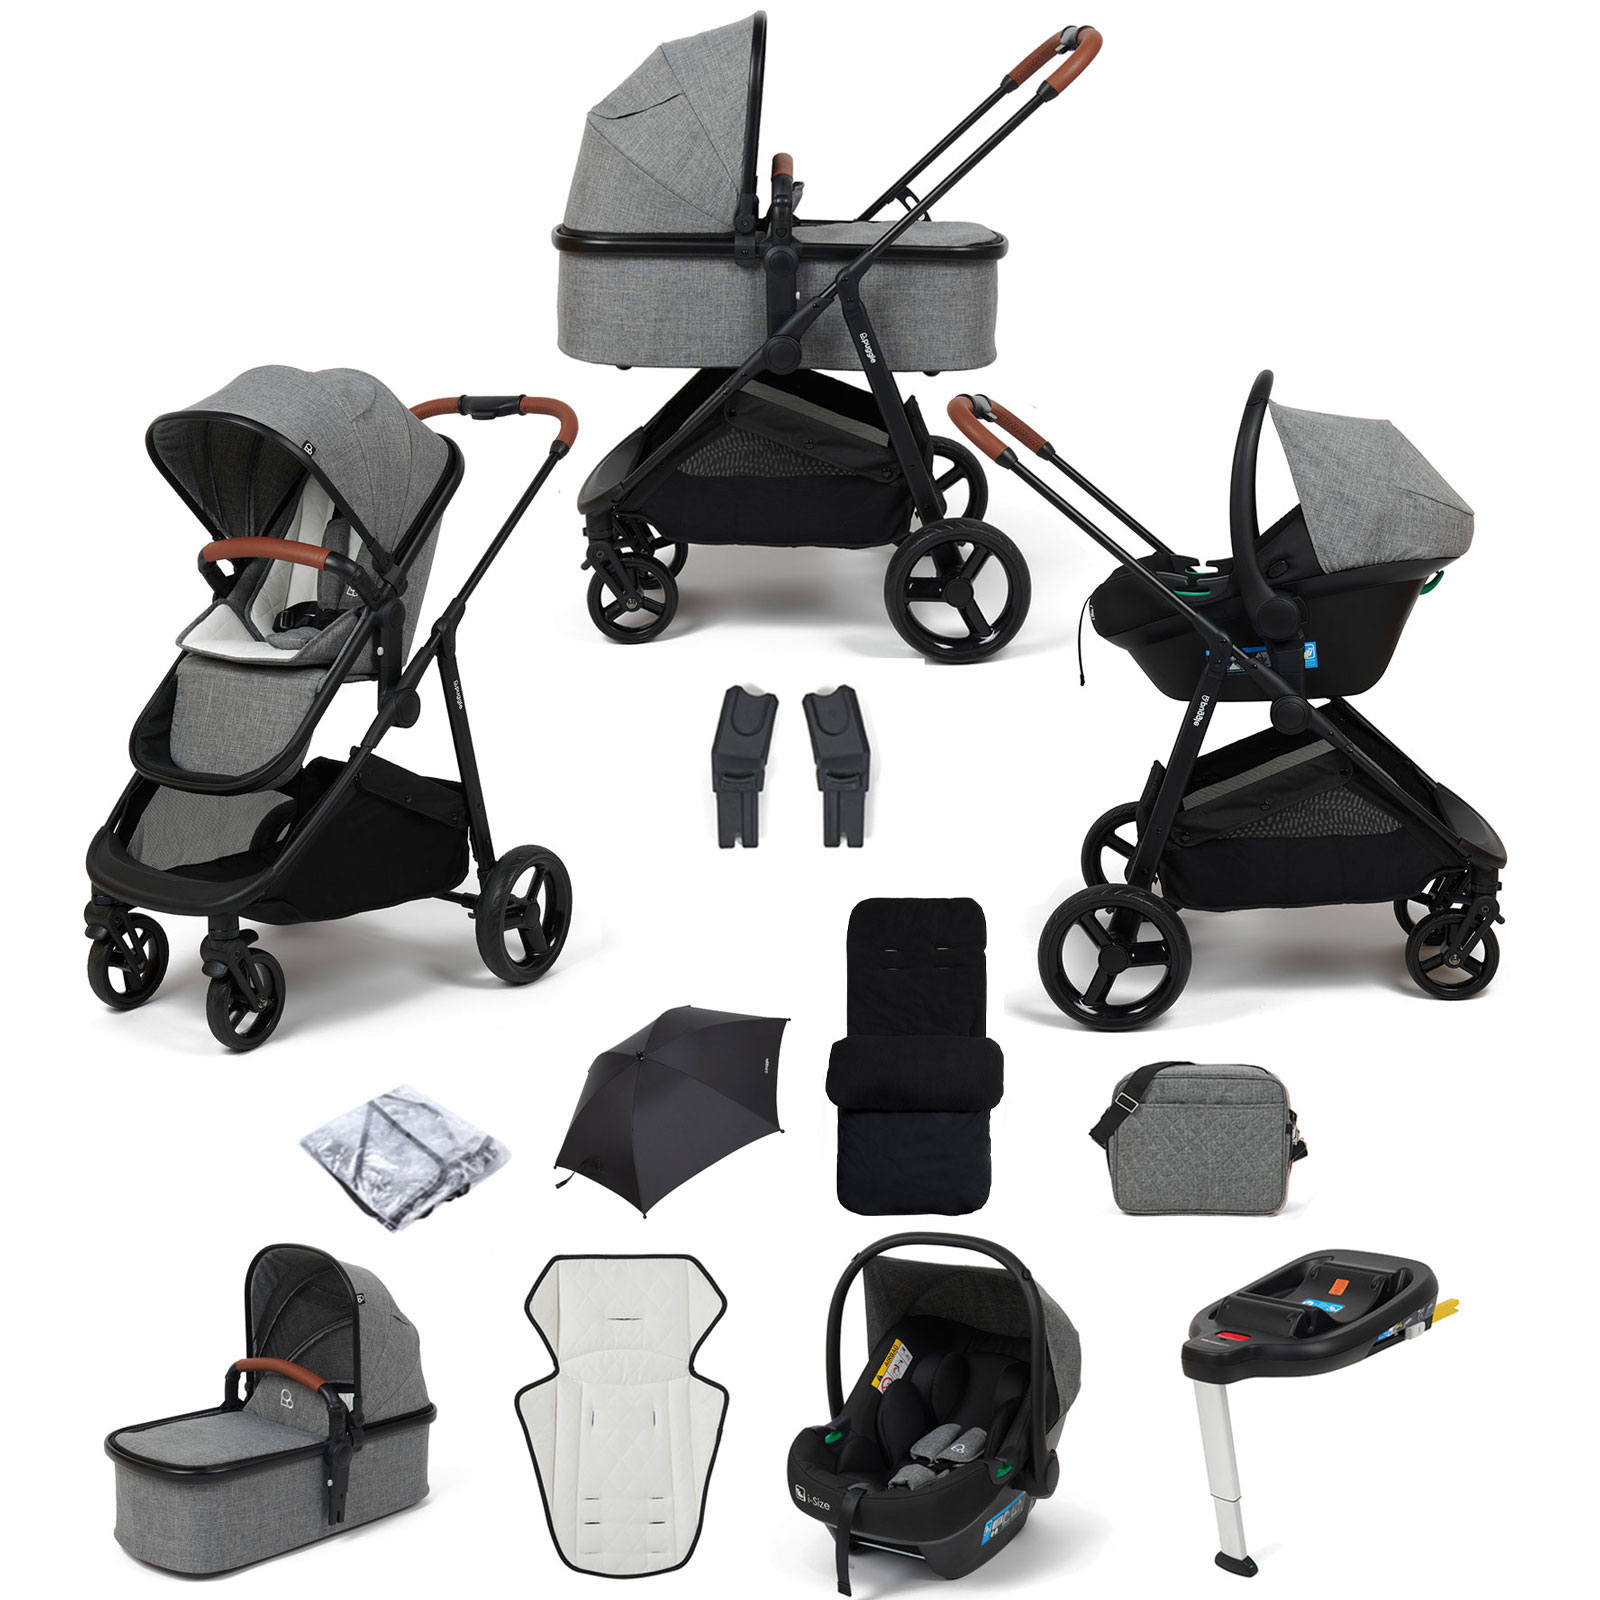 Puggle Monaco XT 3in1 i-Size Travel System with Changing Bag, Deluxe Footmuff, Parasol & ISOFIX Base - Graphite Grey